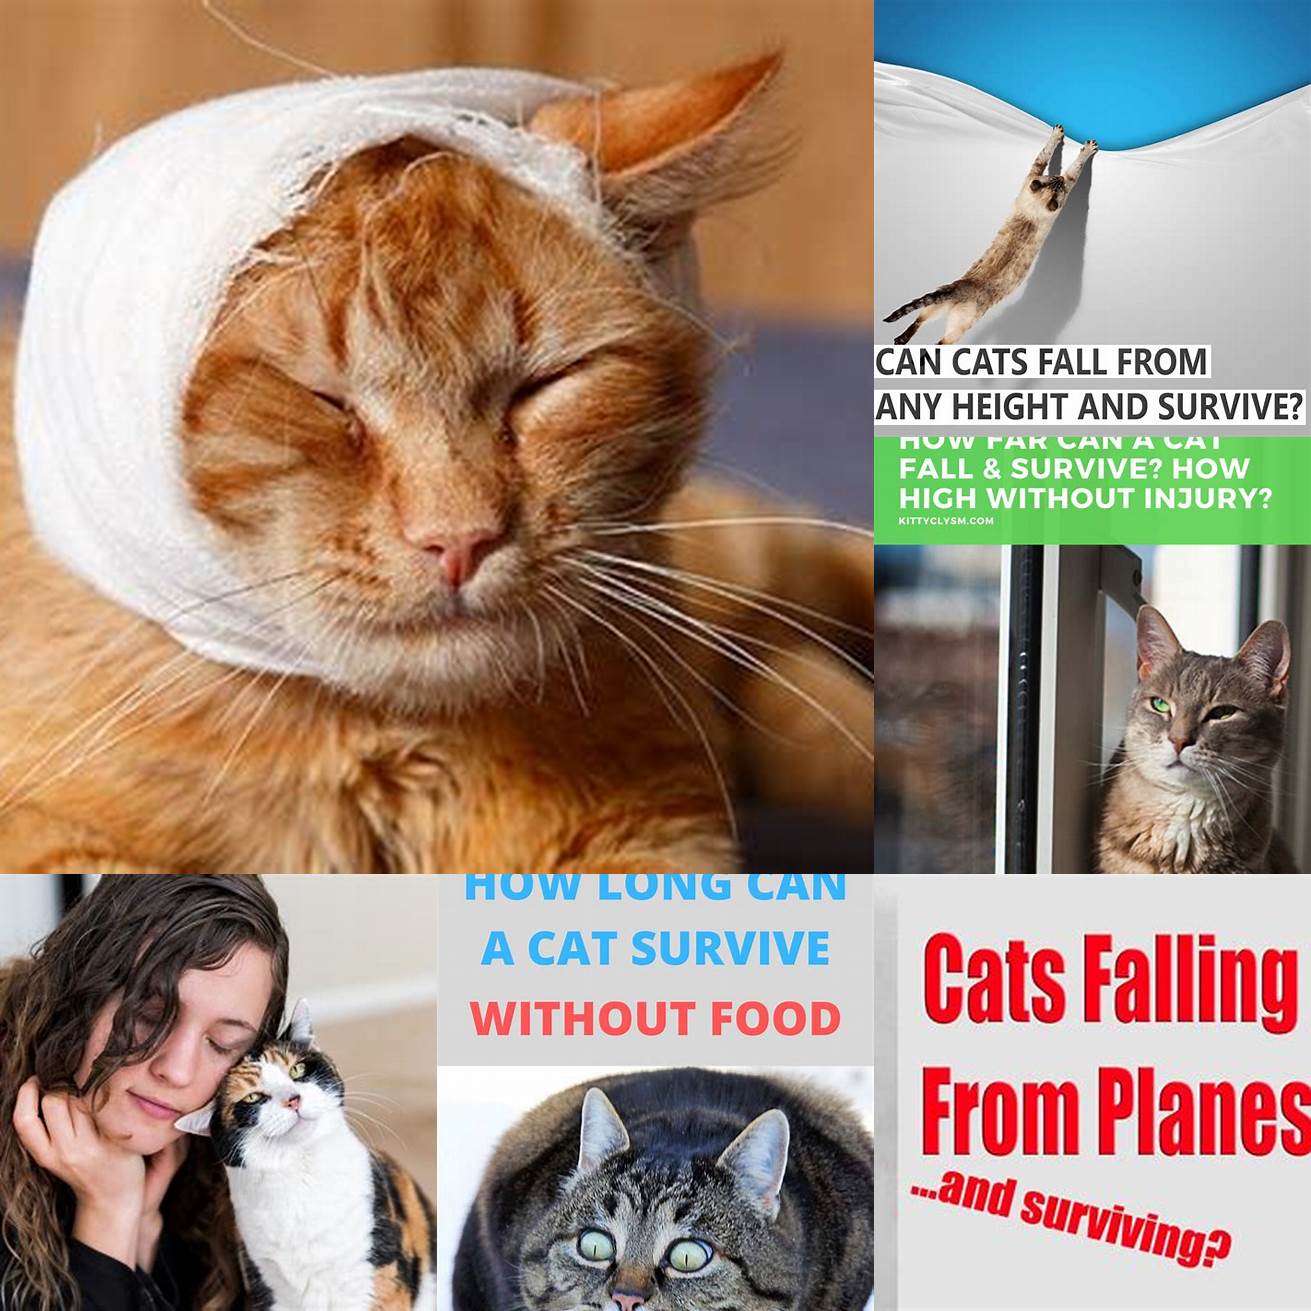 Emotional trauma - Even if a cat survives the fall it may suffer from emotional trauma